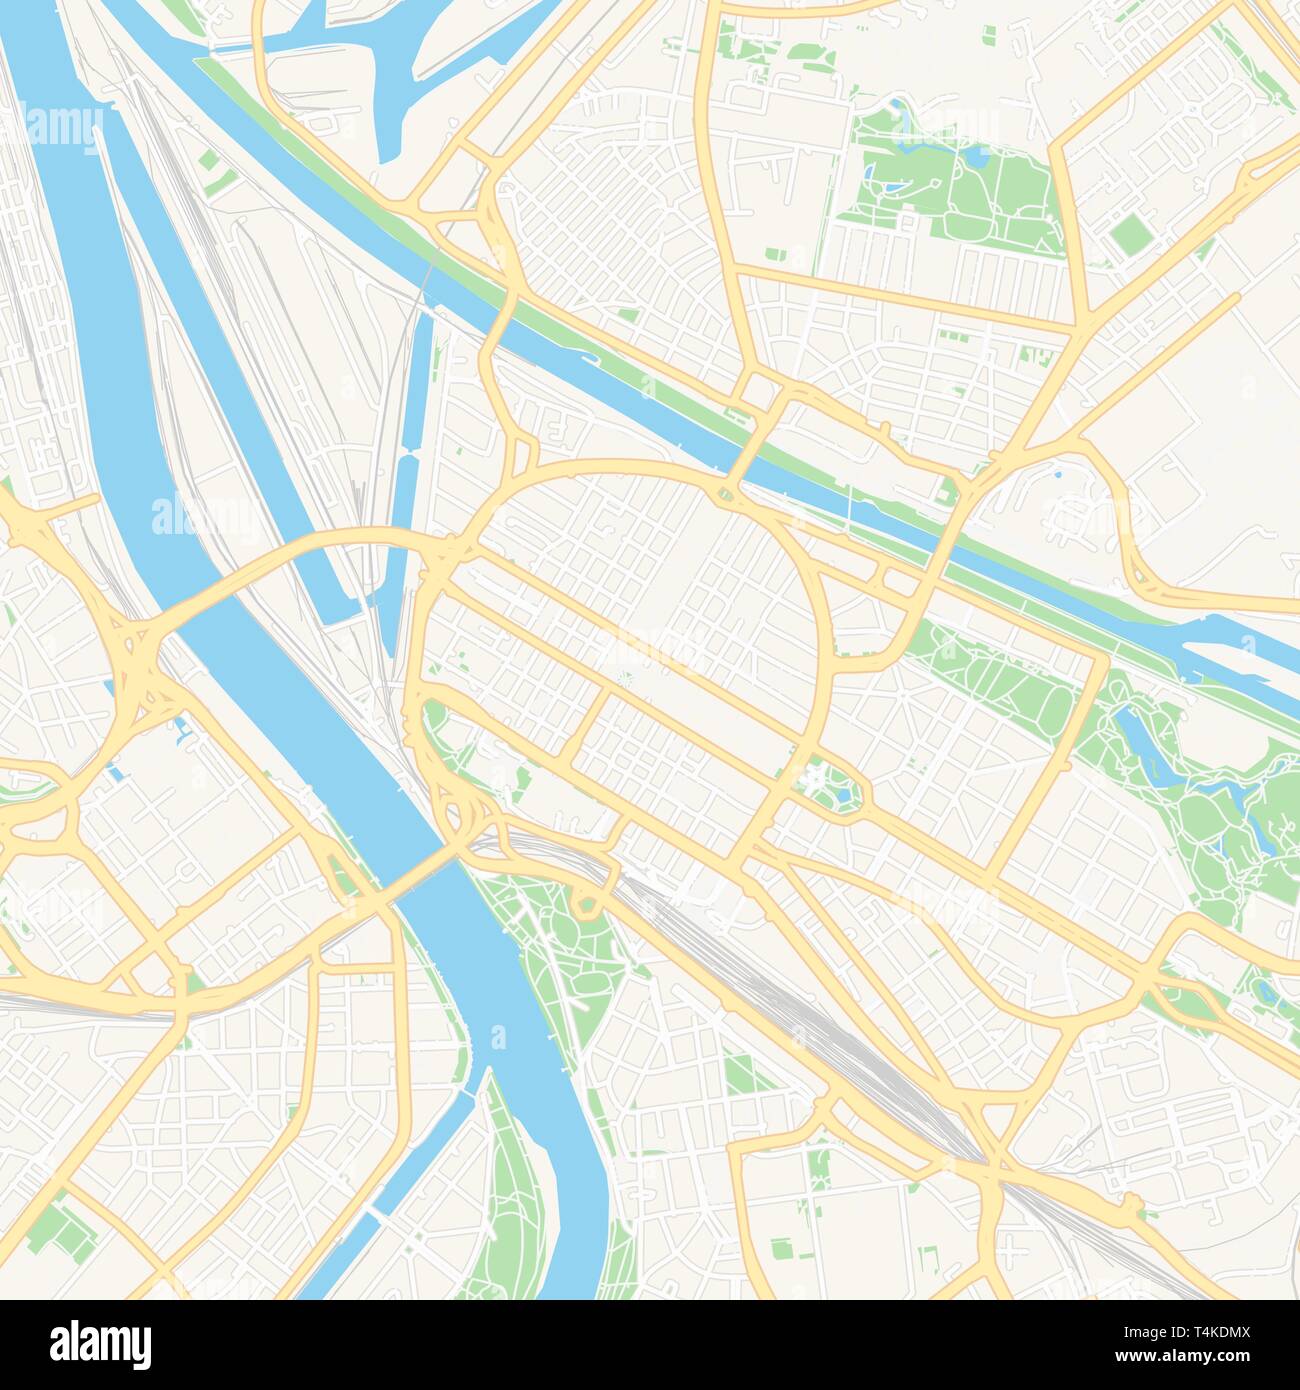 Printable map of Mannheim, Germany with main and secondary roads and larger railways. This map is carefully designed for routing and placing individua Stock Vector